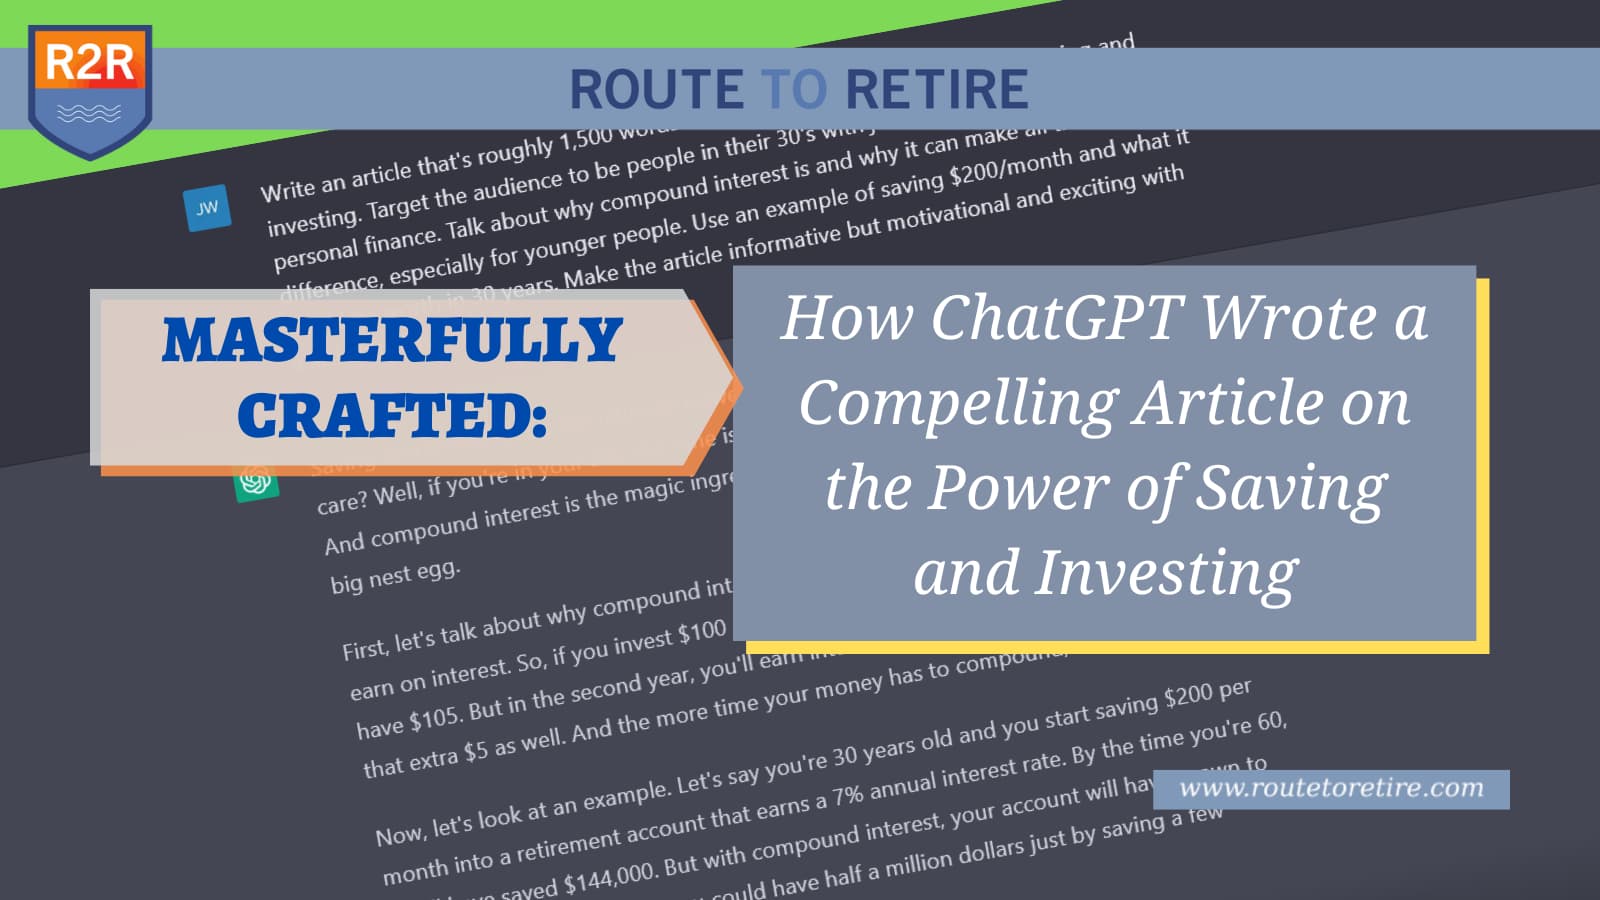 Masterfully Crafted: How ChatGPT Wrote a Compelling Article on the Power of Saving and Investing